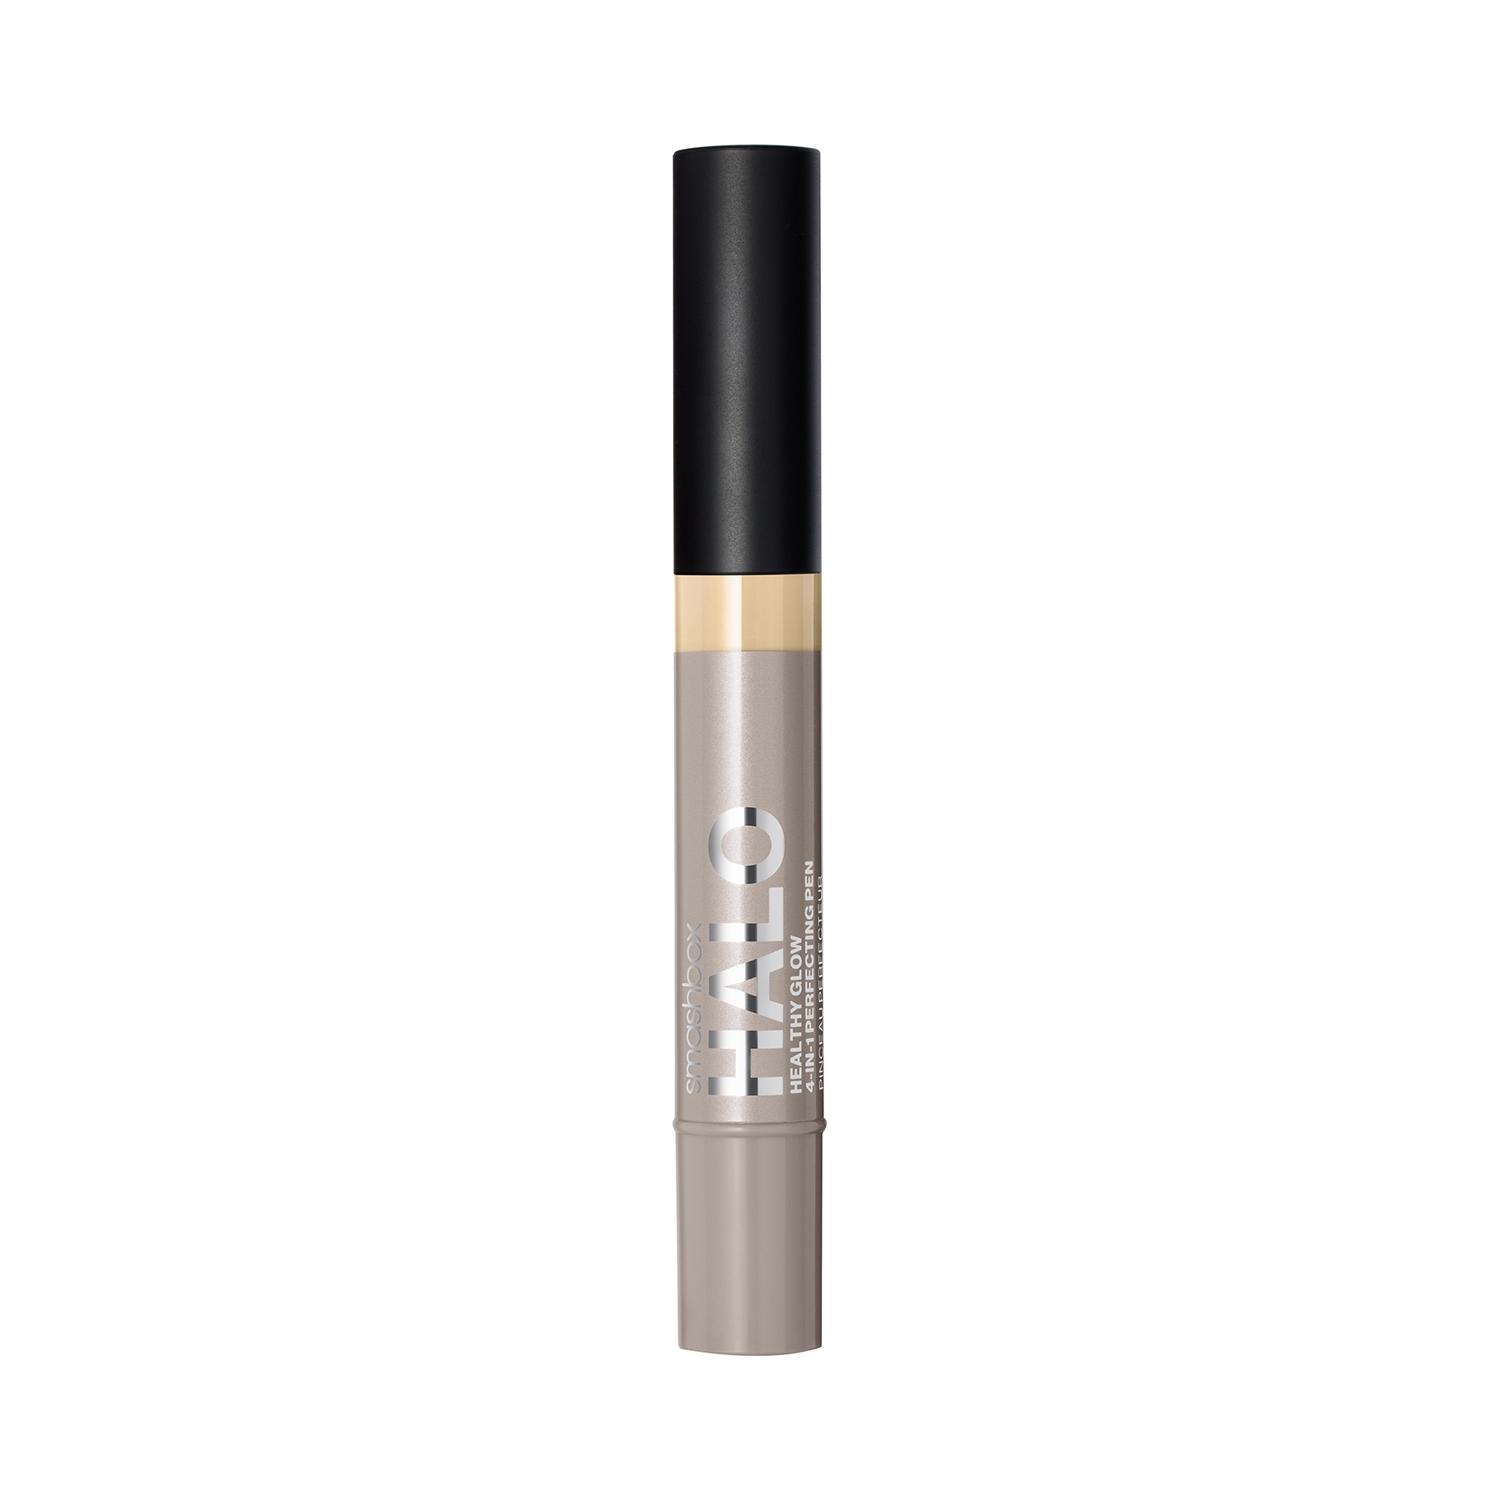 smashbox halo healthy glow 4-in-1 perfecting concealer pen - f20w (3.5ml)